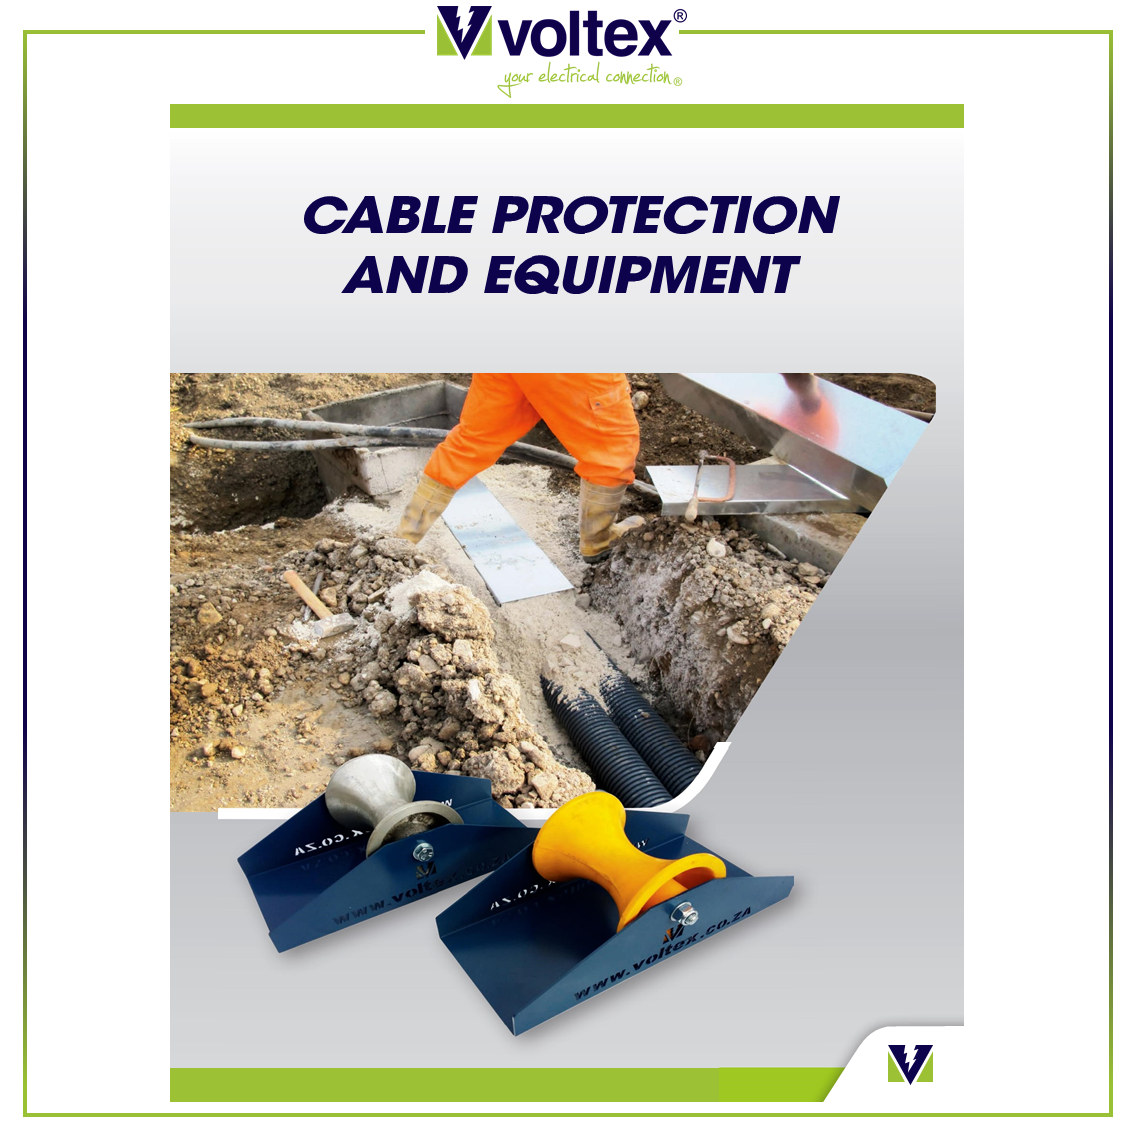 VOLTEX - Cable Protection Catalogue